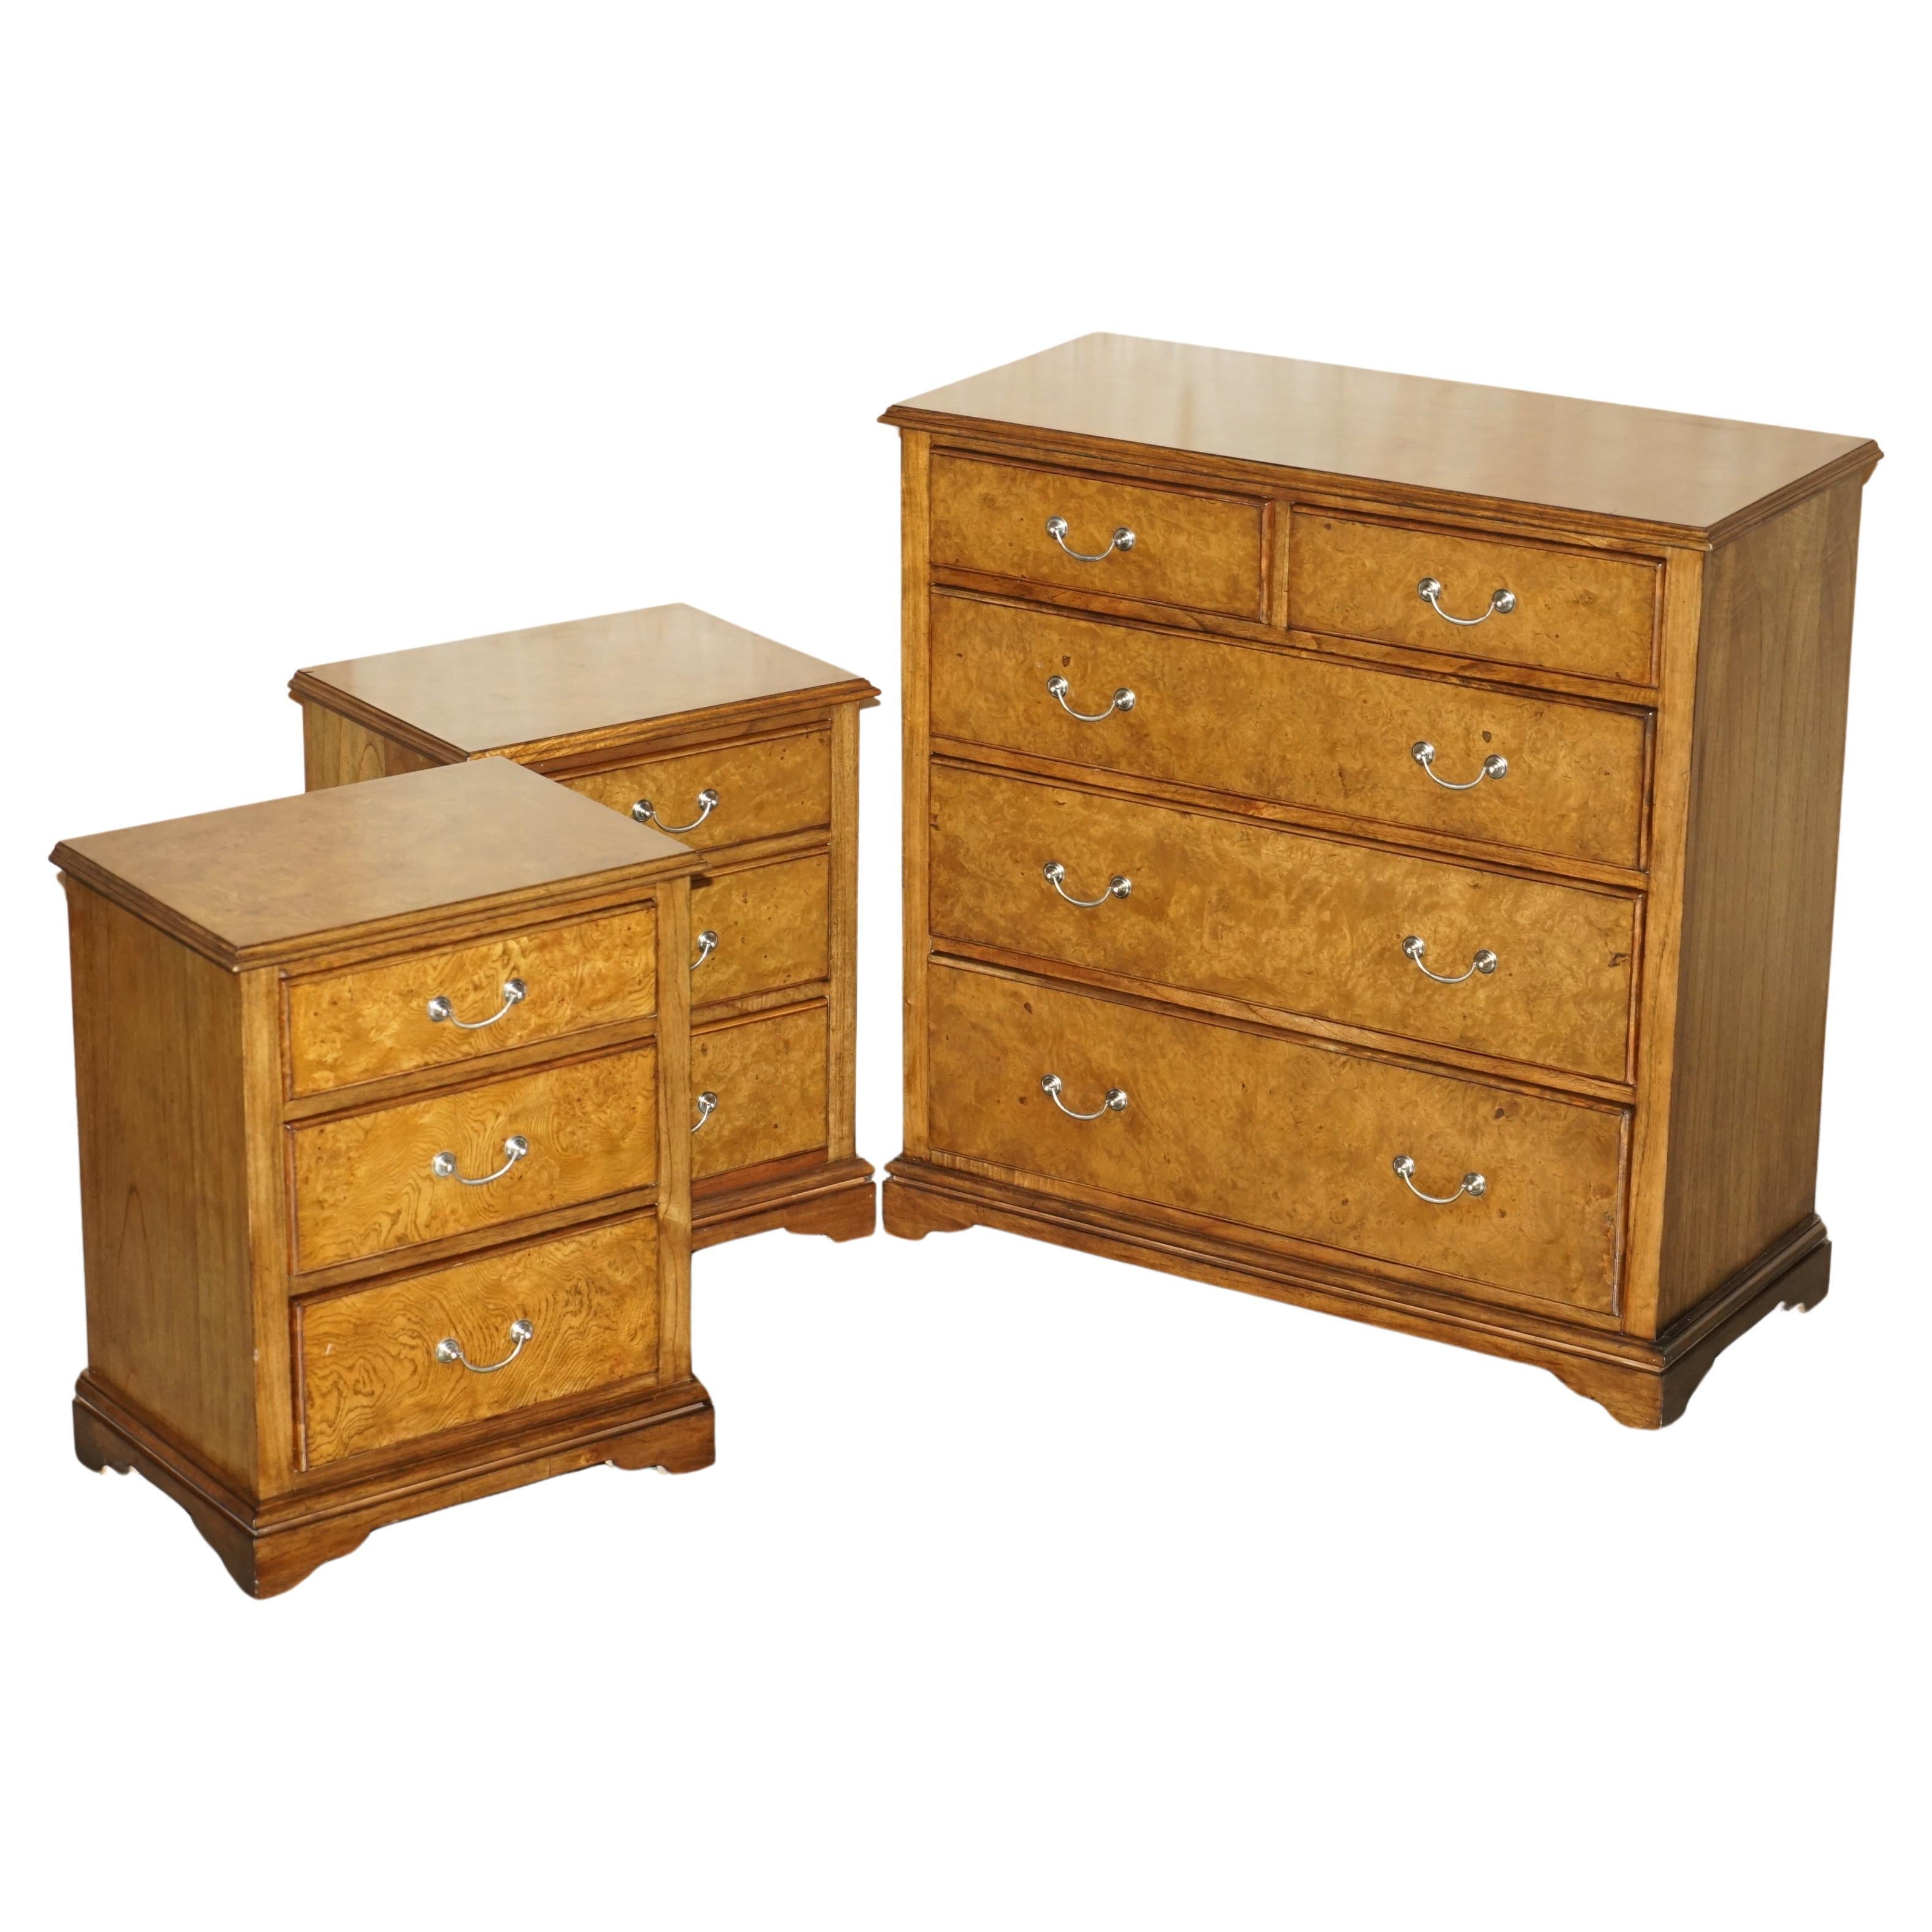 SUiTE OF BURR ELM BEDROOM CHEST OF DRAWERS & PAIR OF BEDSIDE TABLE NIGHTSTANDS For Sale